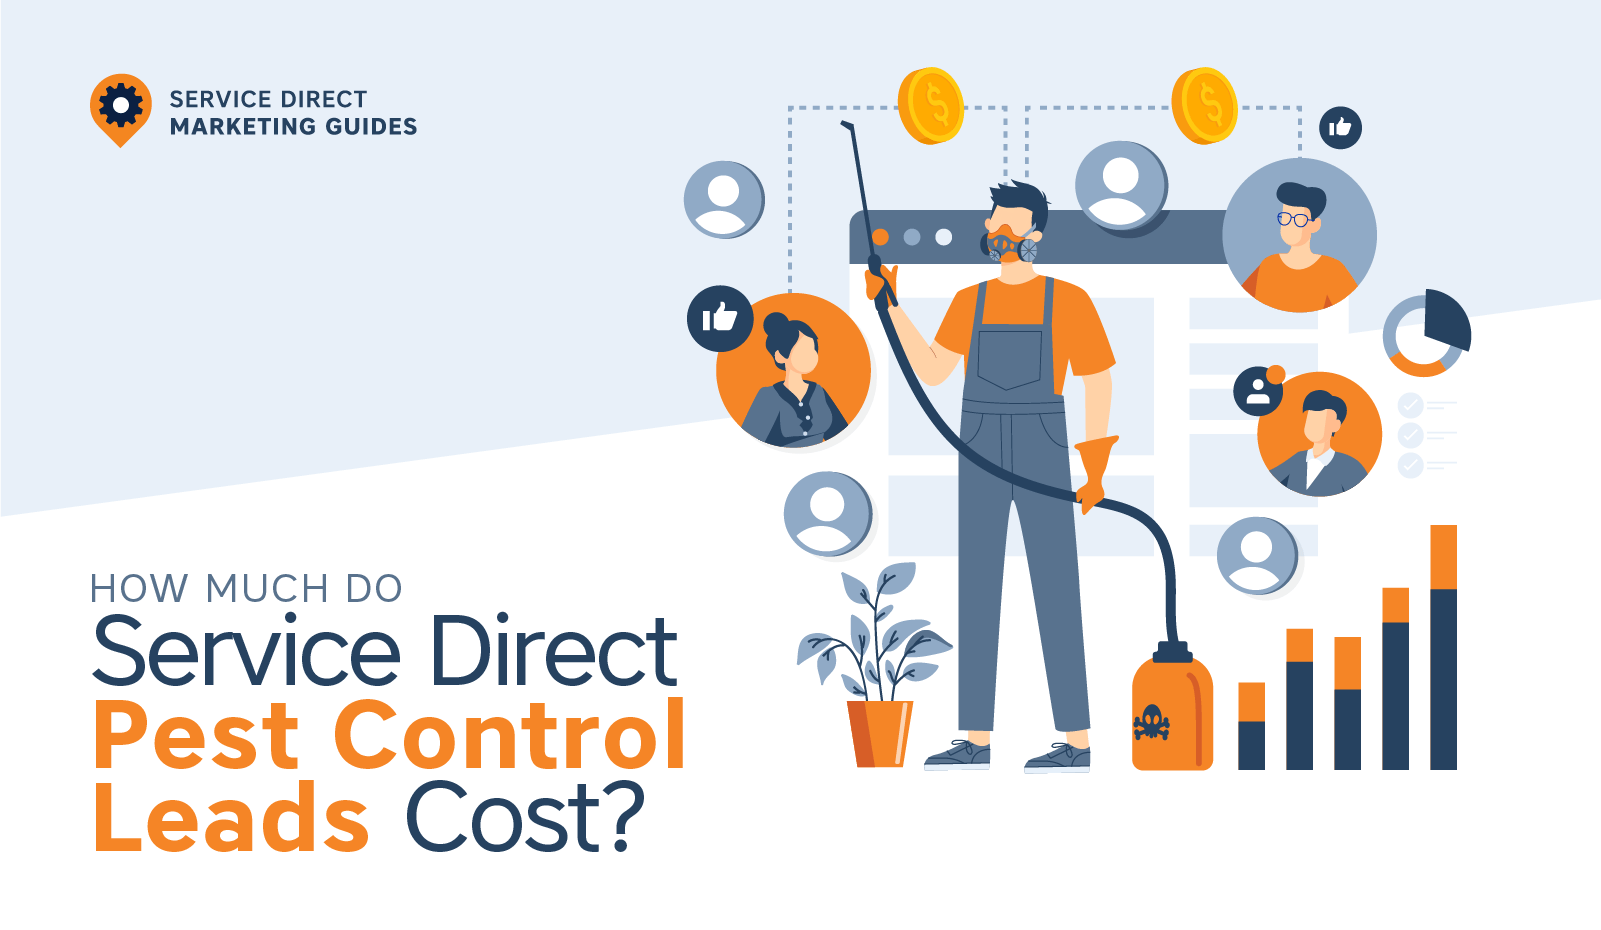 How Much Do Service Direct Pest Control Leads Cost